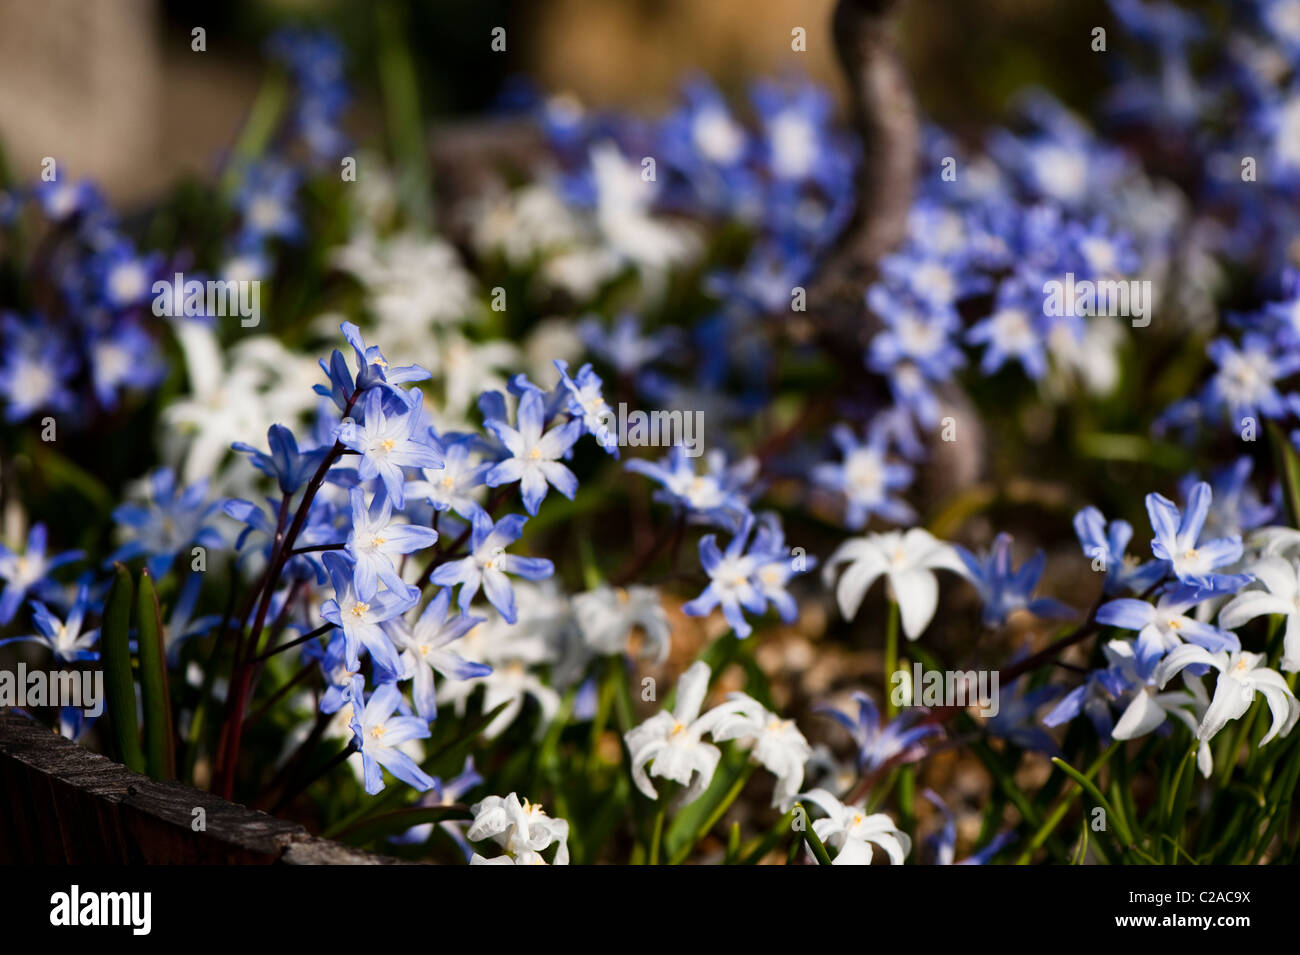 Chionodoxa Forbesii and Chionodoxa Luciliae Alba, Glory of the Snow, in a wooden planter Stock Photo